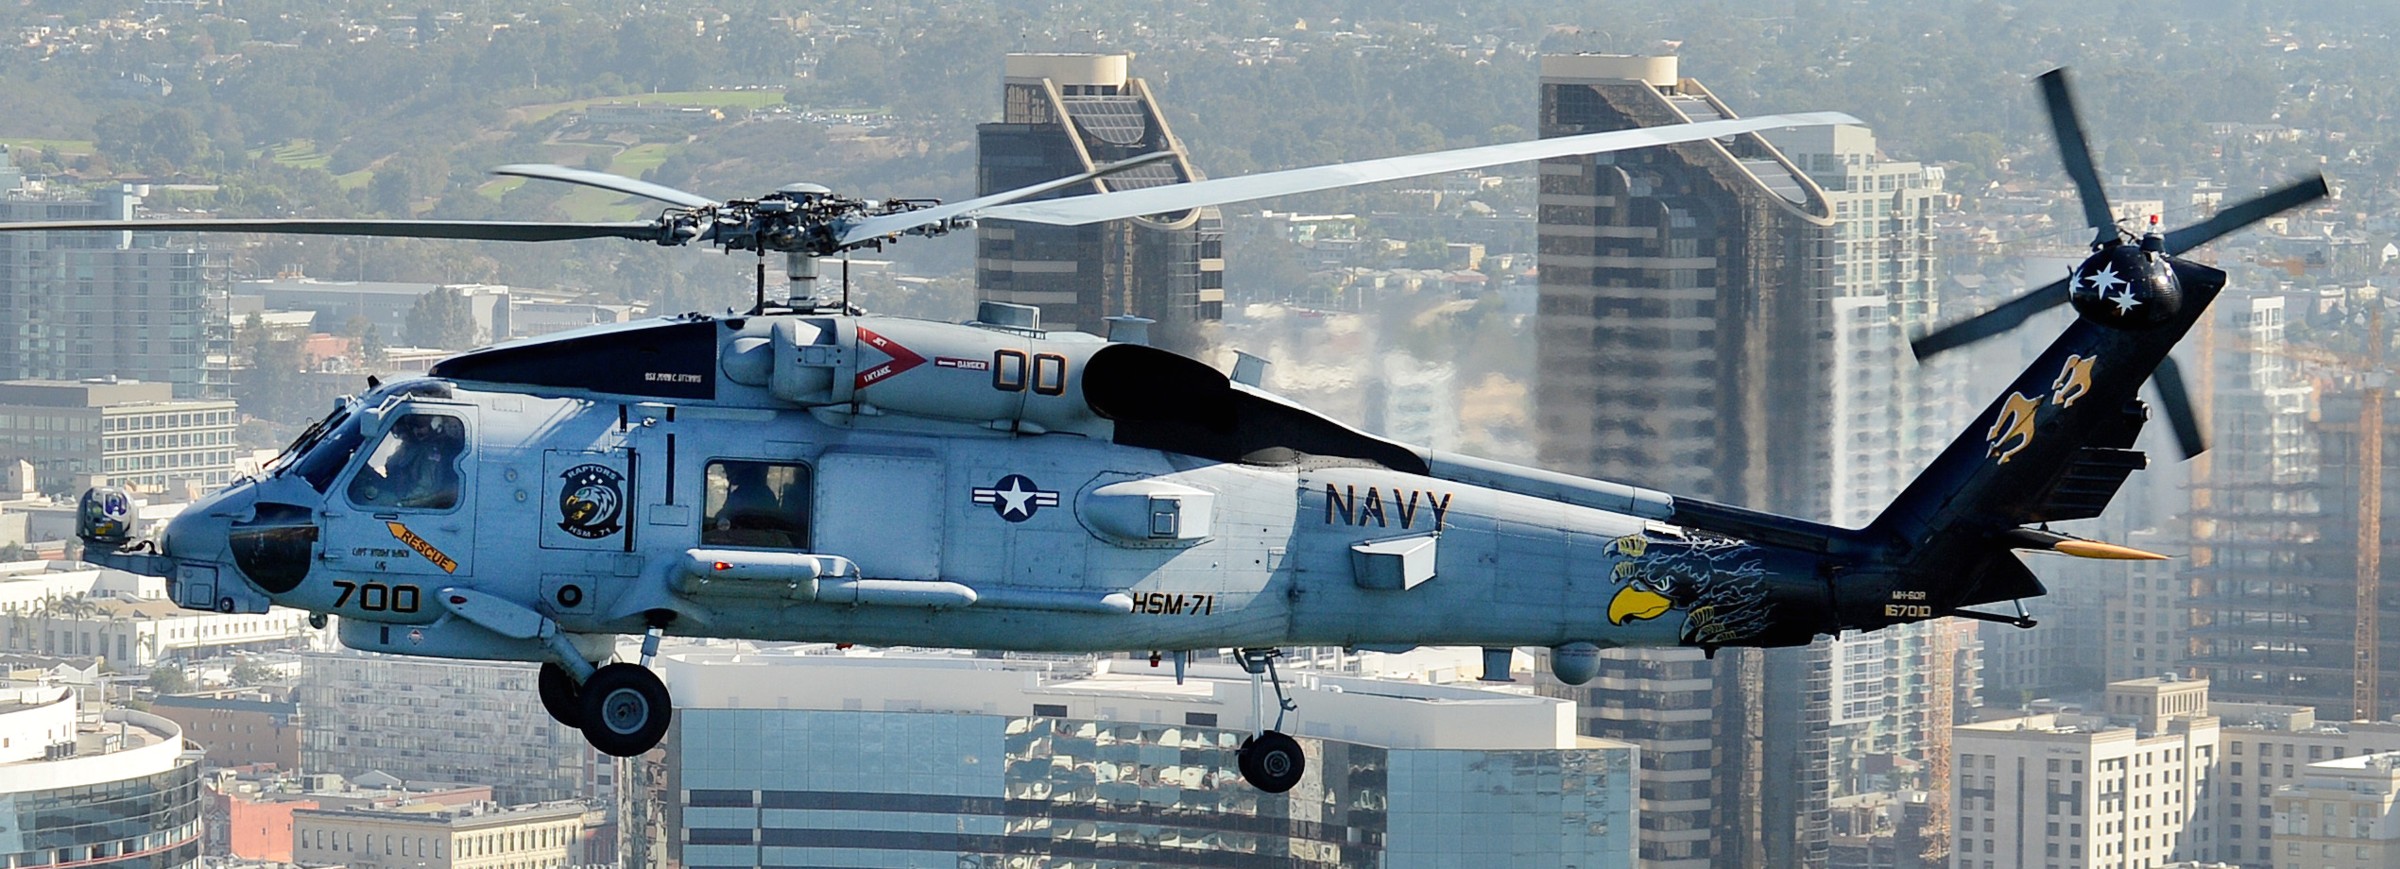 hsm-71 raptors helicopter maritime strike squadron mh-60r seahawk navy 2014 63